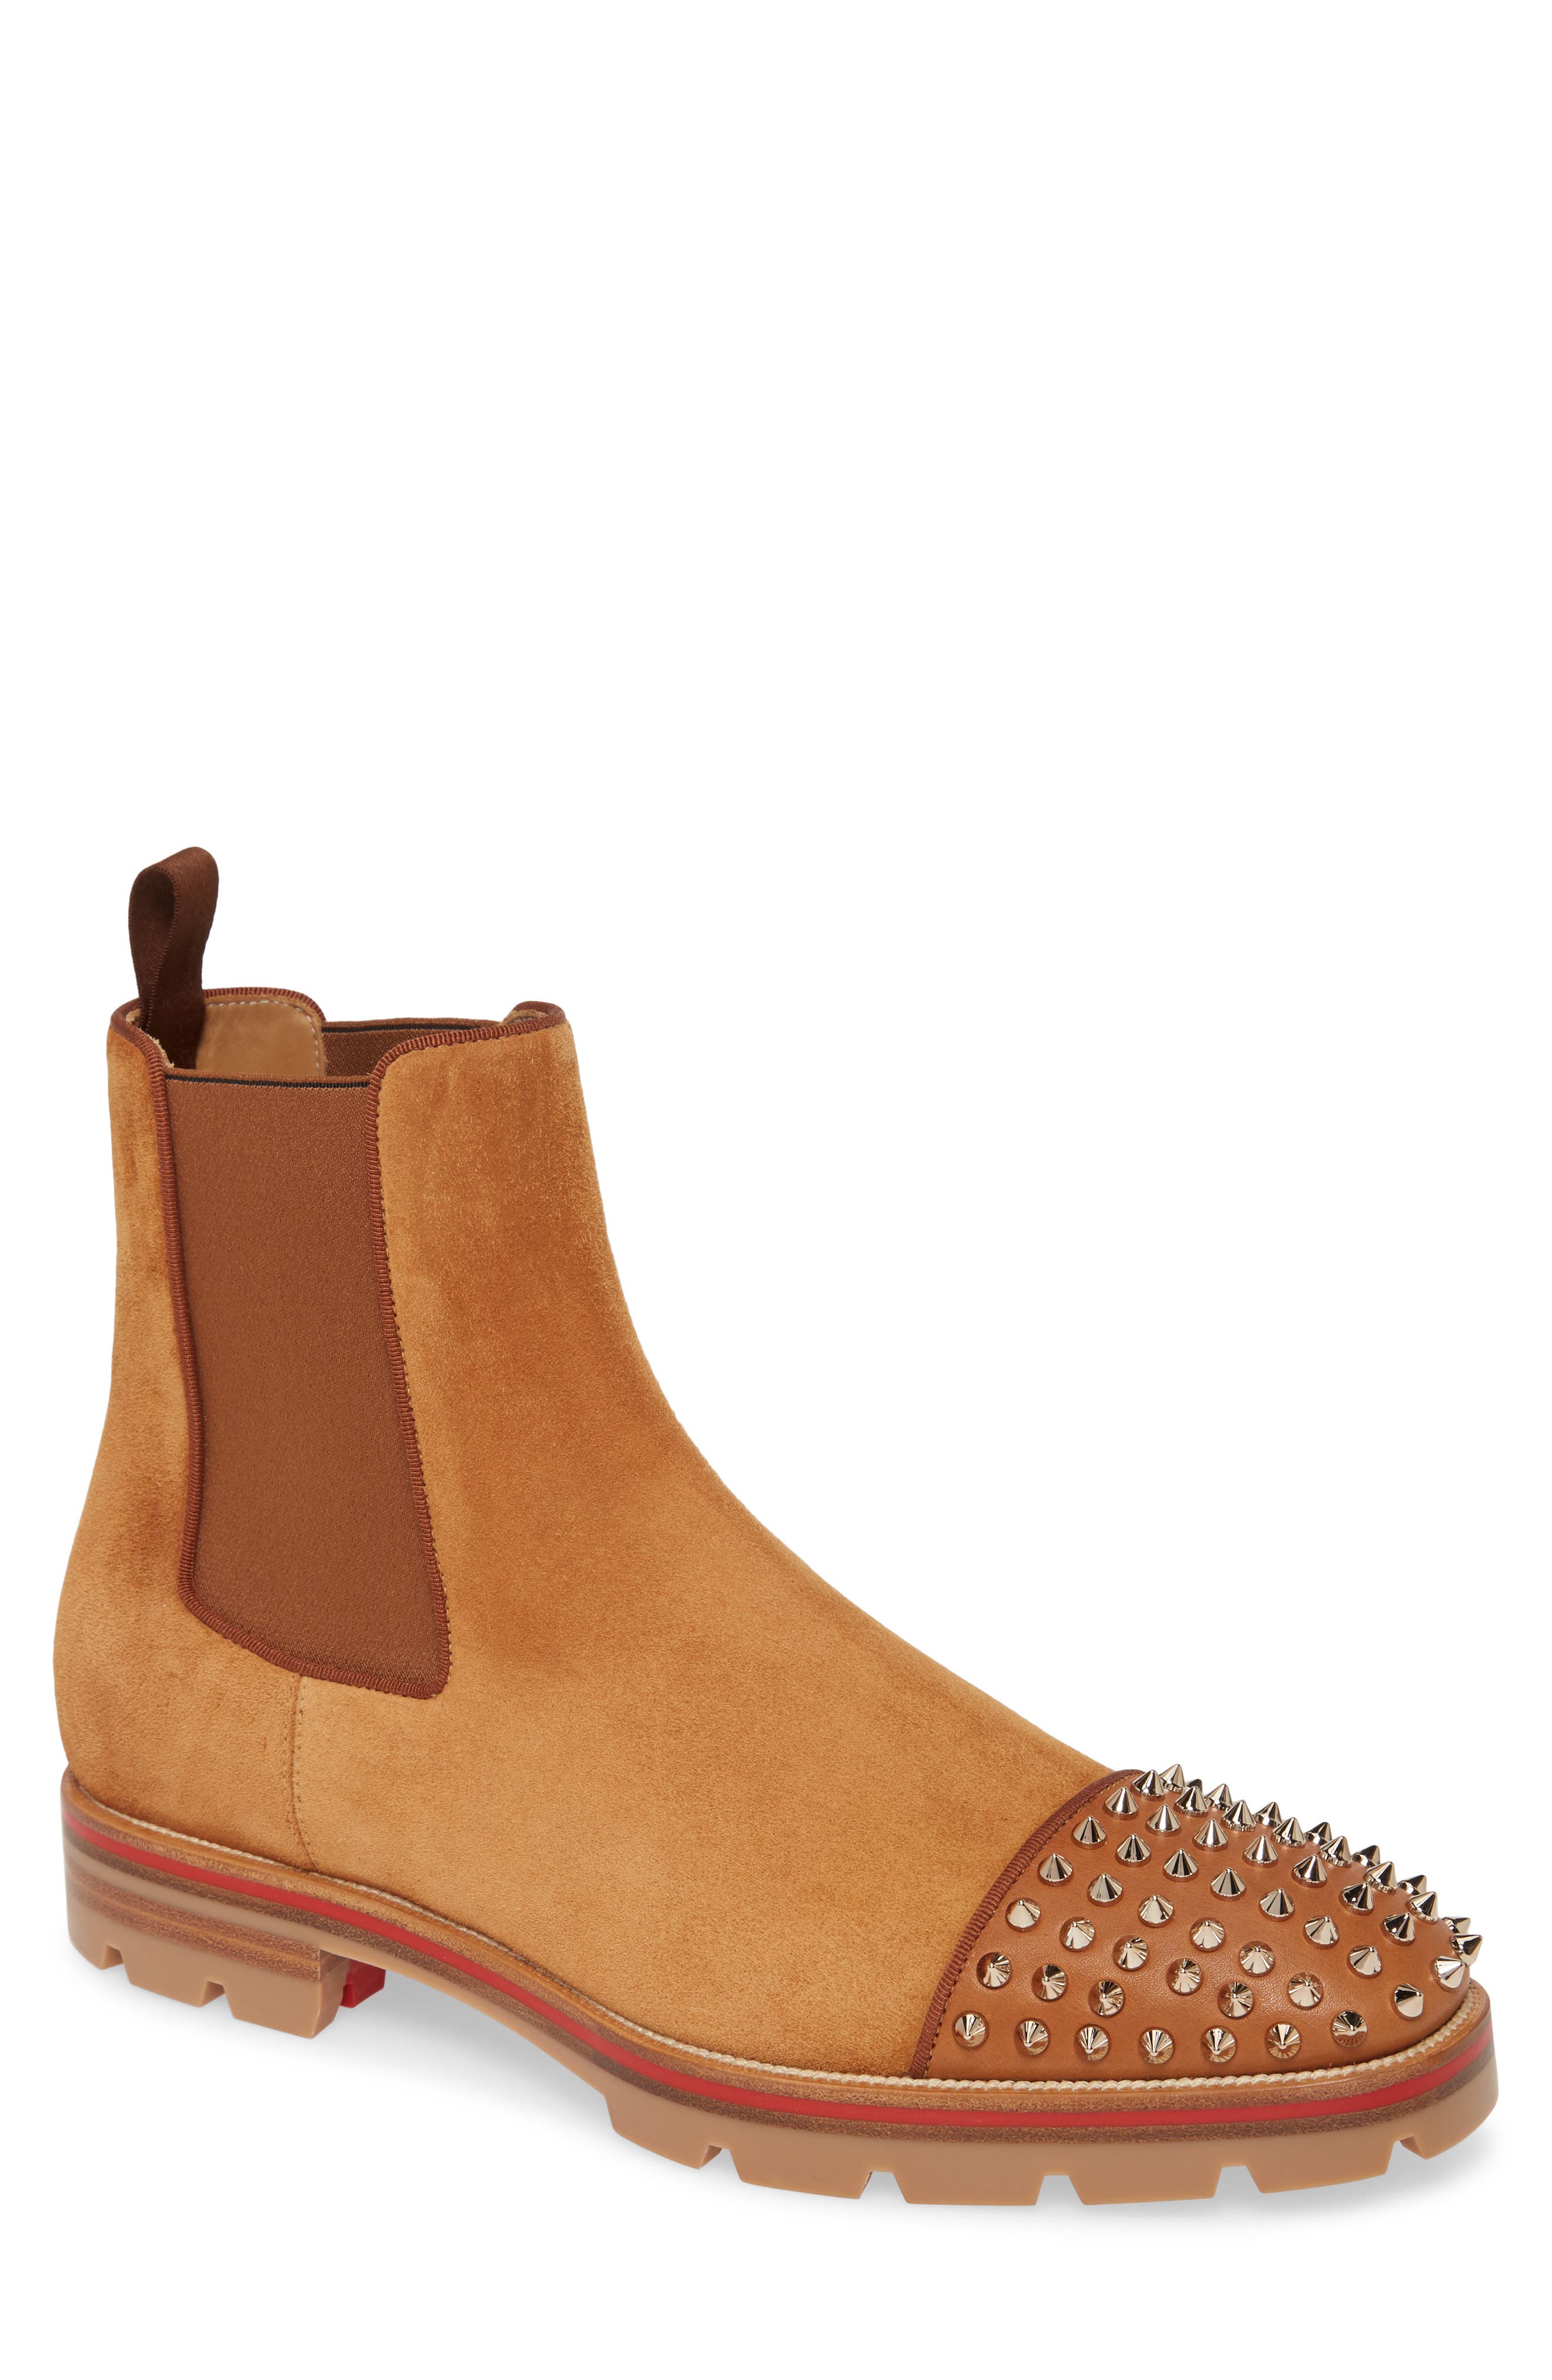 mens louboutin studded boots